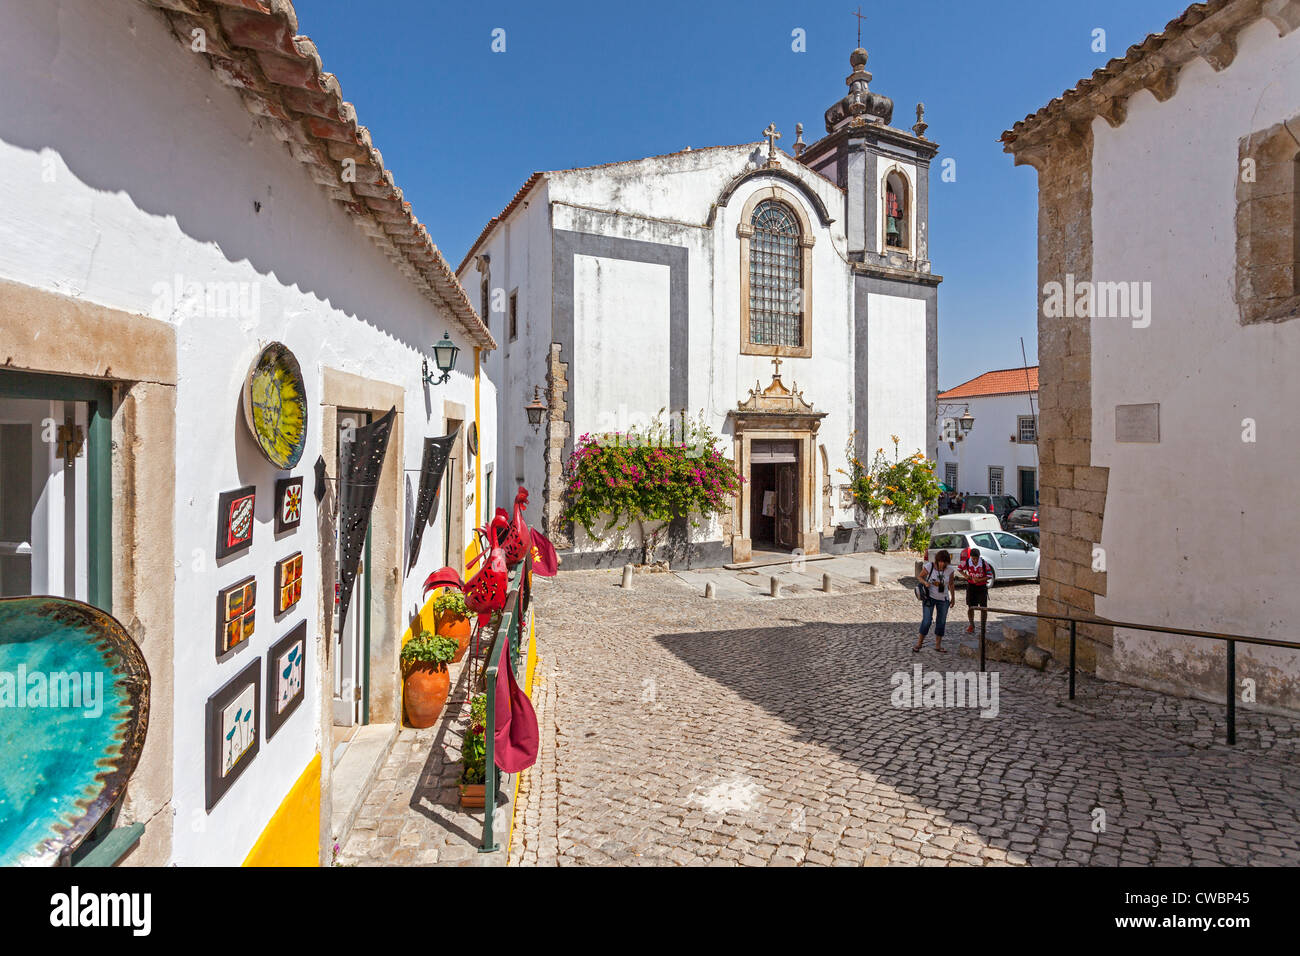 Sao Pedro church in Obidos. Obidos is a very well preserved medieval town, still inside the castle walls in Portugal. Stock Photo